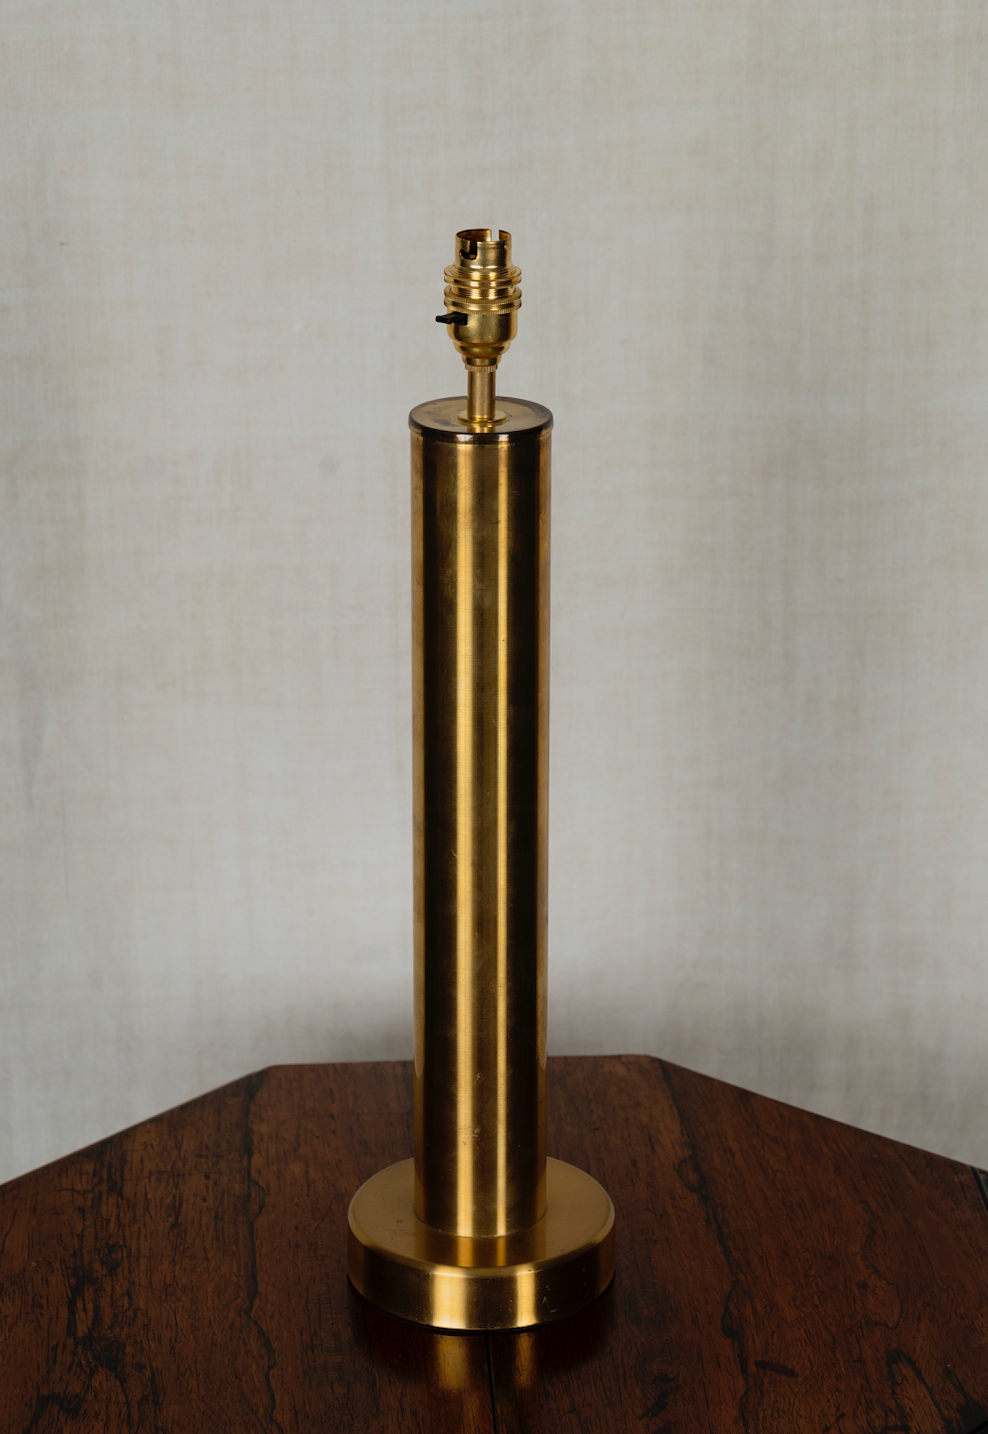 Pair of Brass Table Lamps by Kosta Elarmatur, Sweden